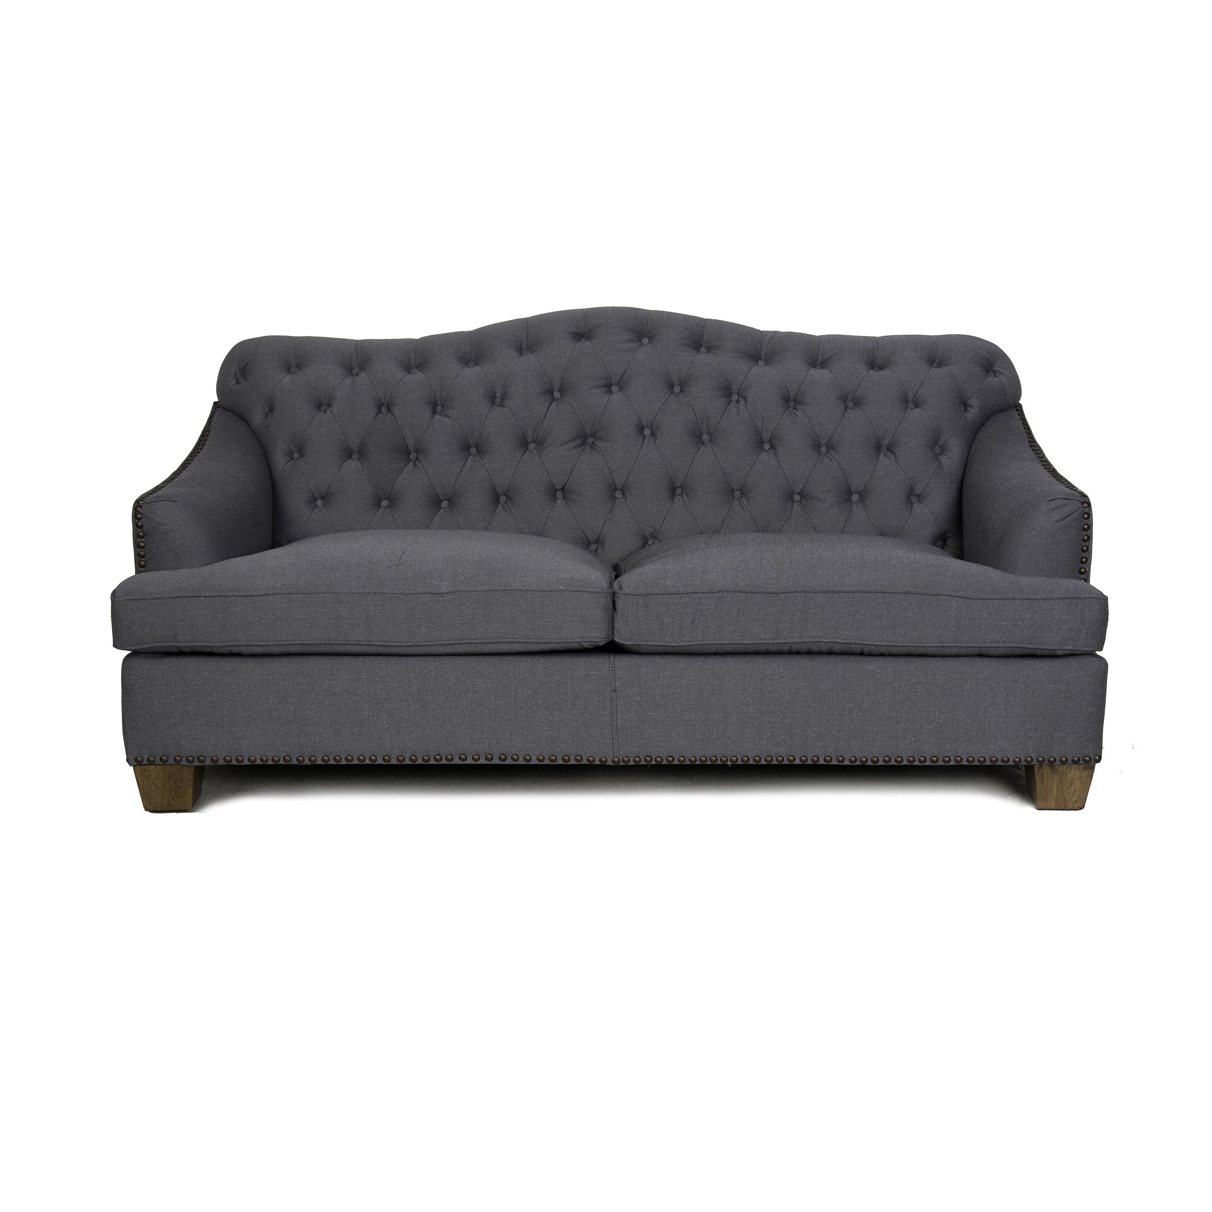 Preferred Light Charcoal Linen Sofas With Bardot Tufted Sofa With Nailheads – Charcoal (Photo 13 of 15)